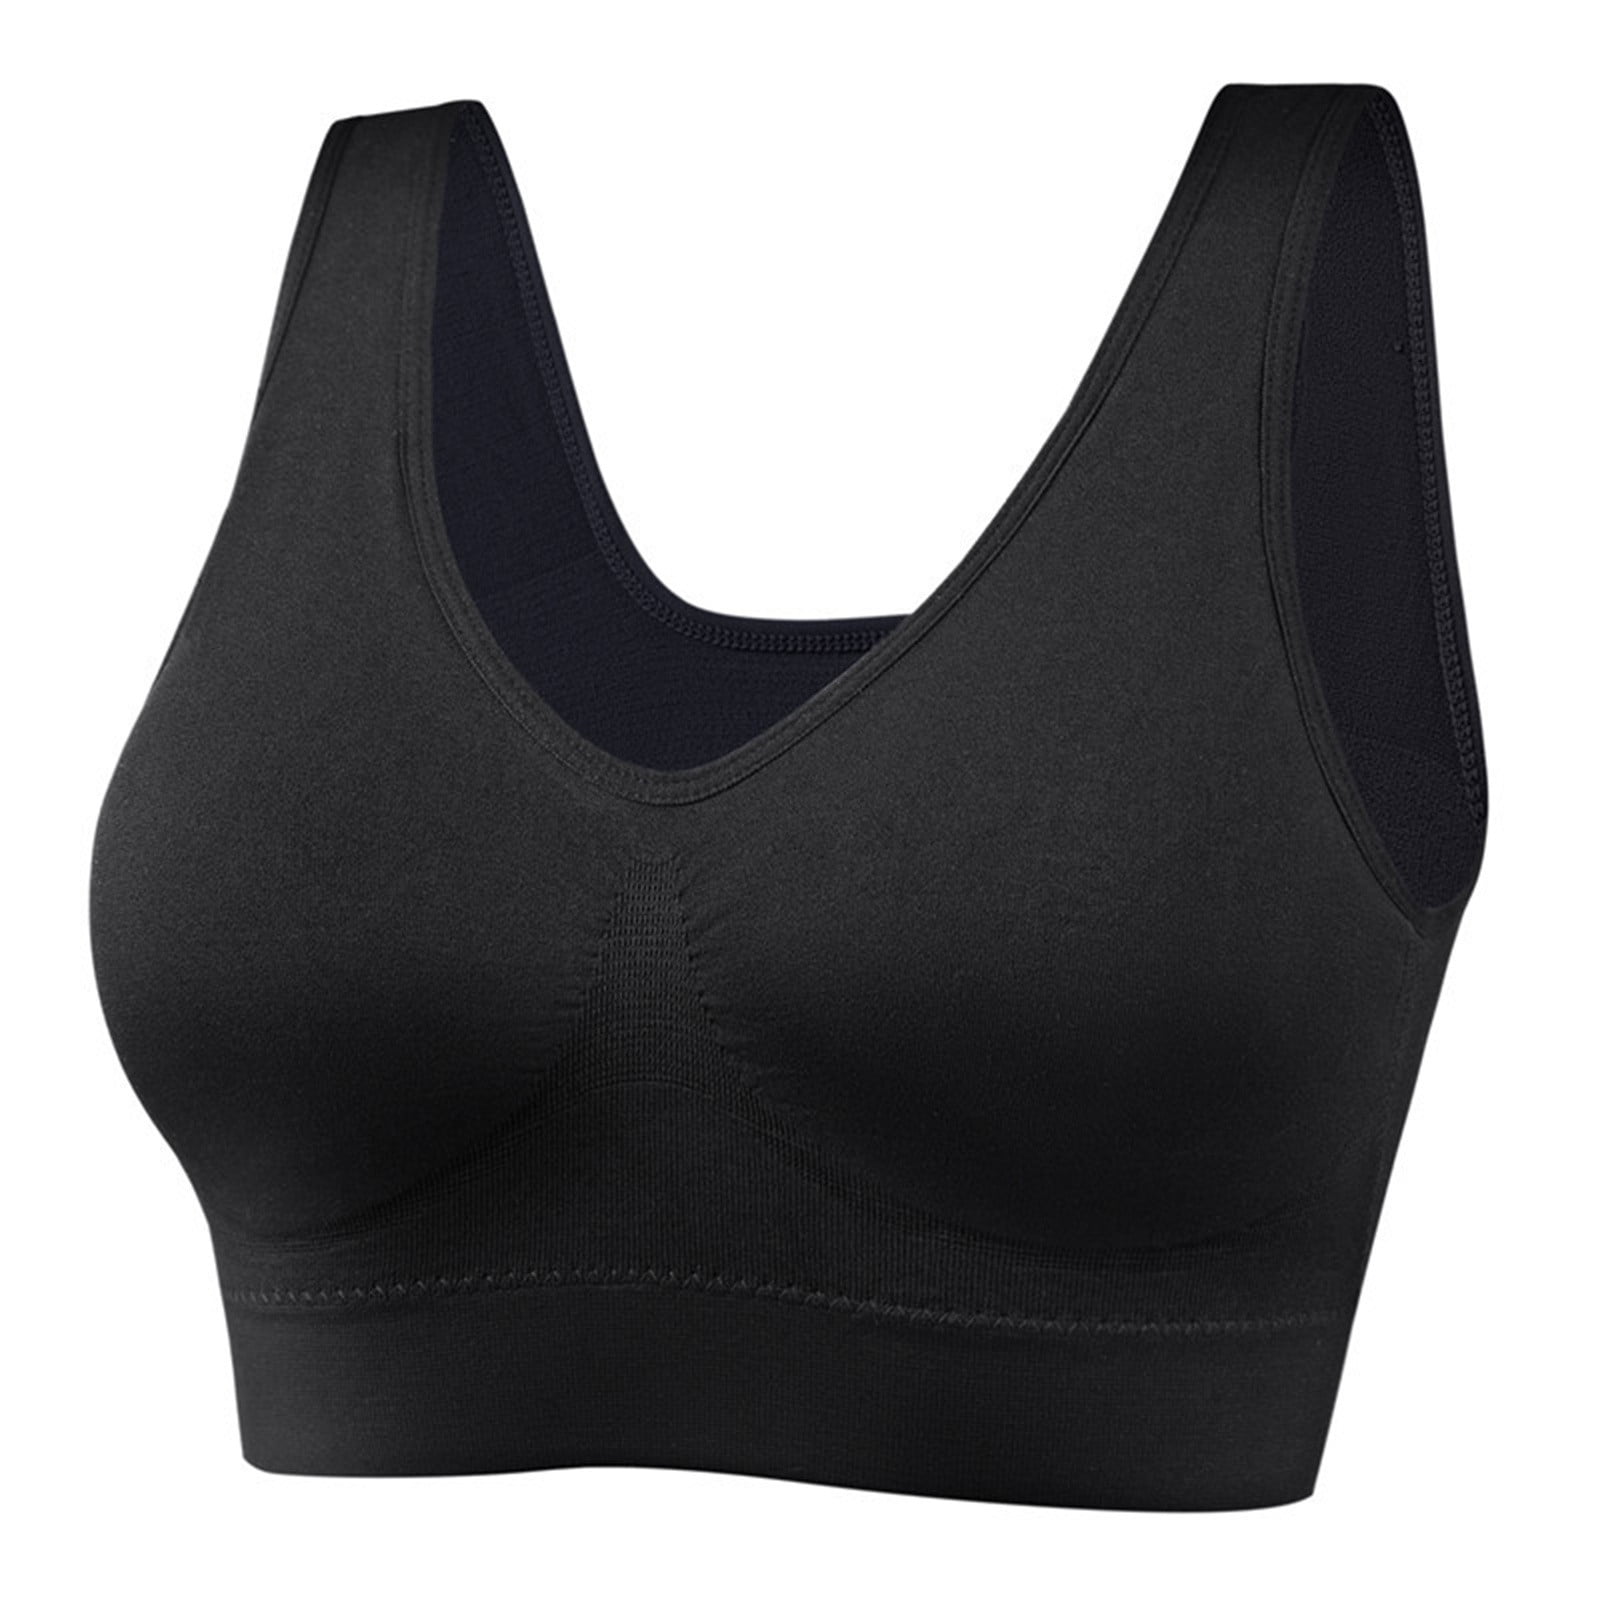 KDDYLITQ Running Sports Bras for Women Yoga Maternity Bras for  Breastfeeding Plus Size Bras for Women No Underwire Push Up Seamless Push  Up Support